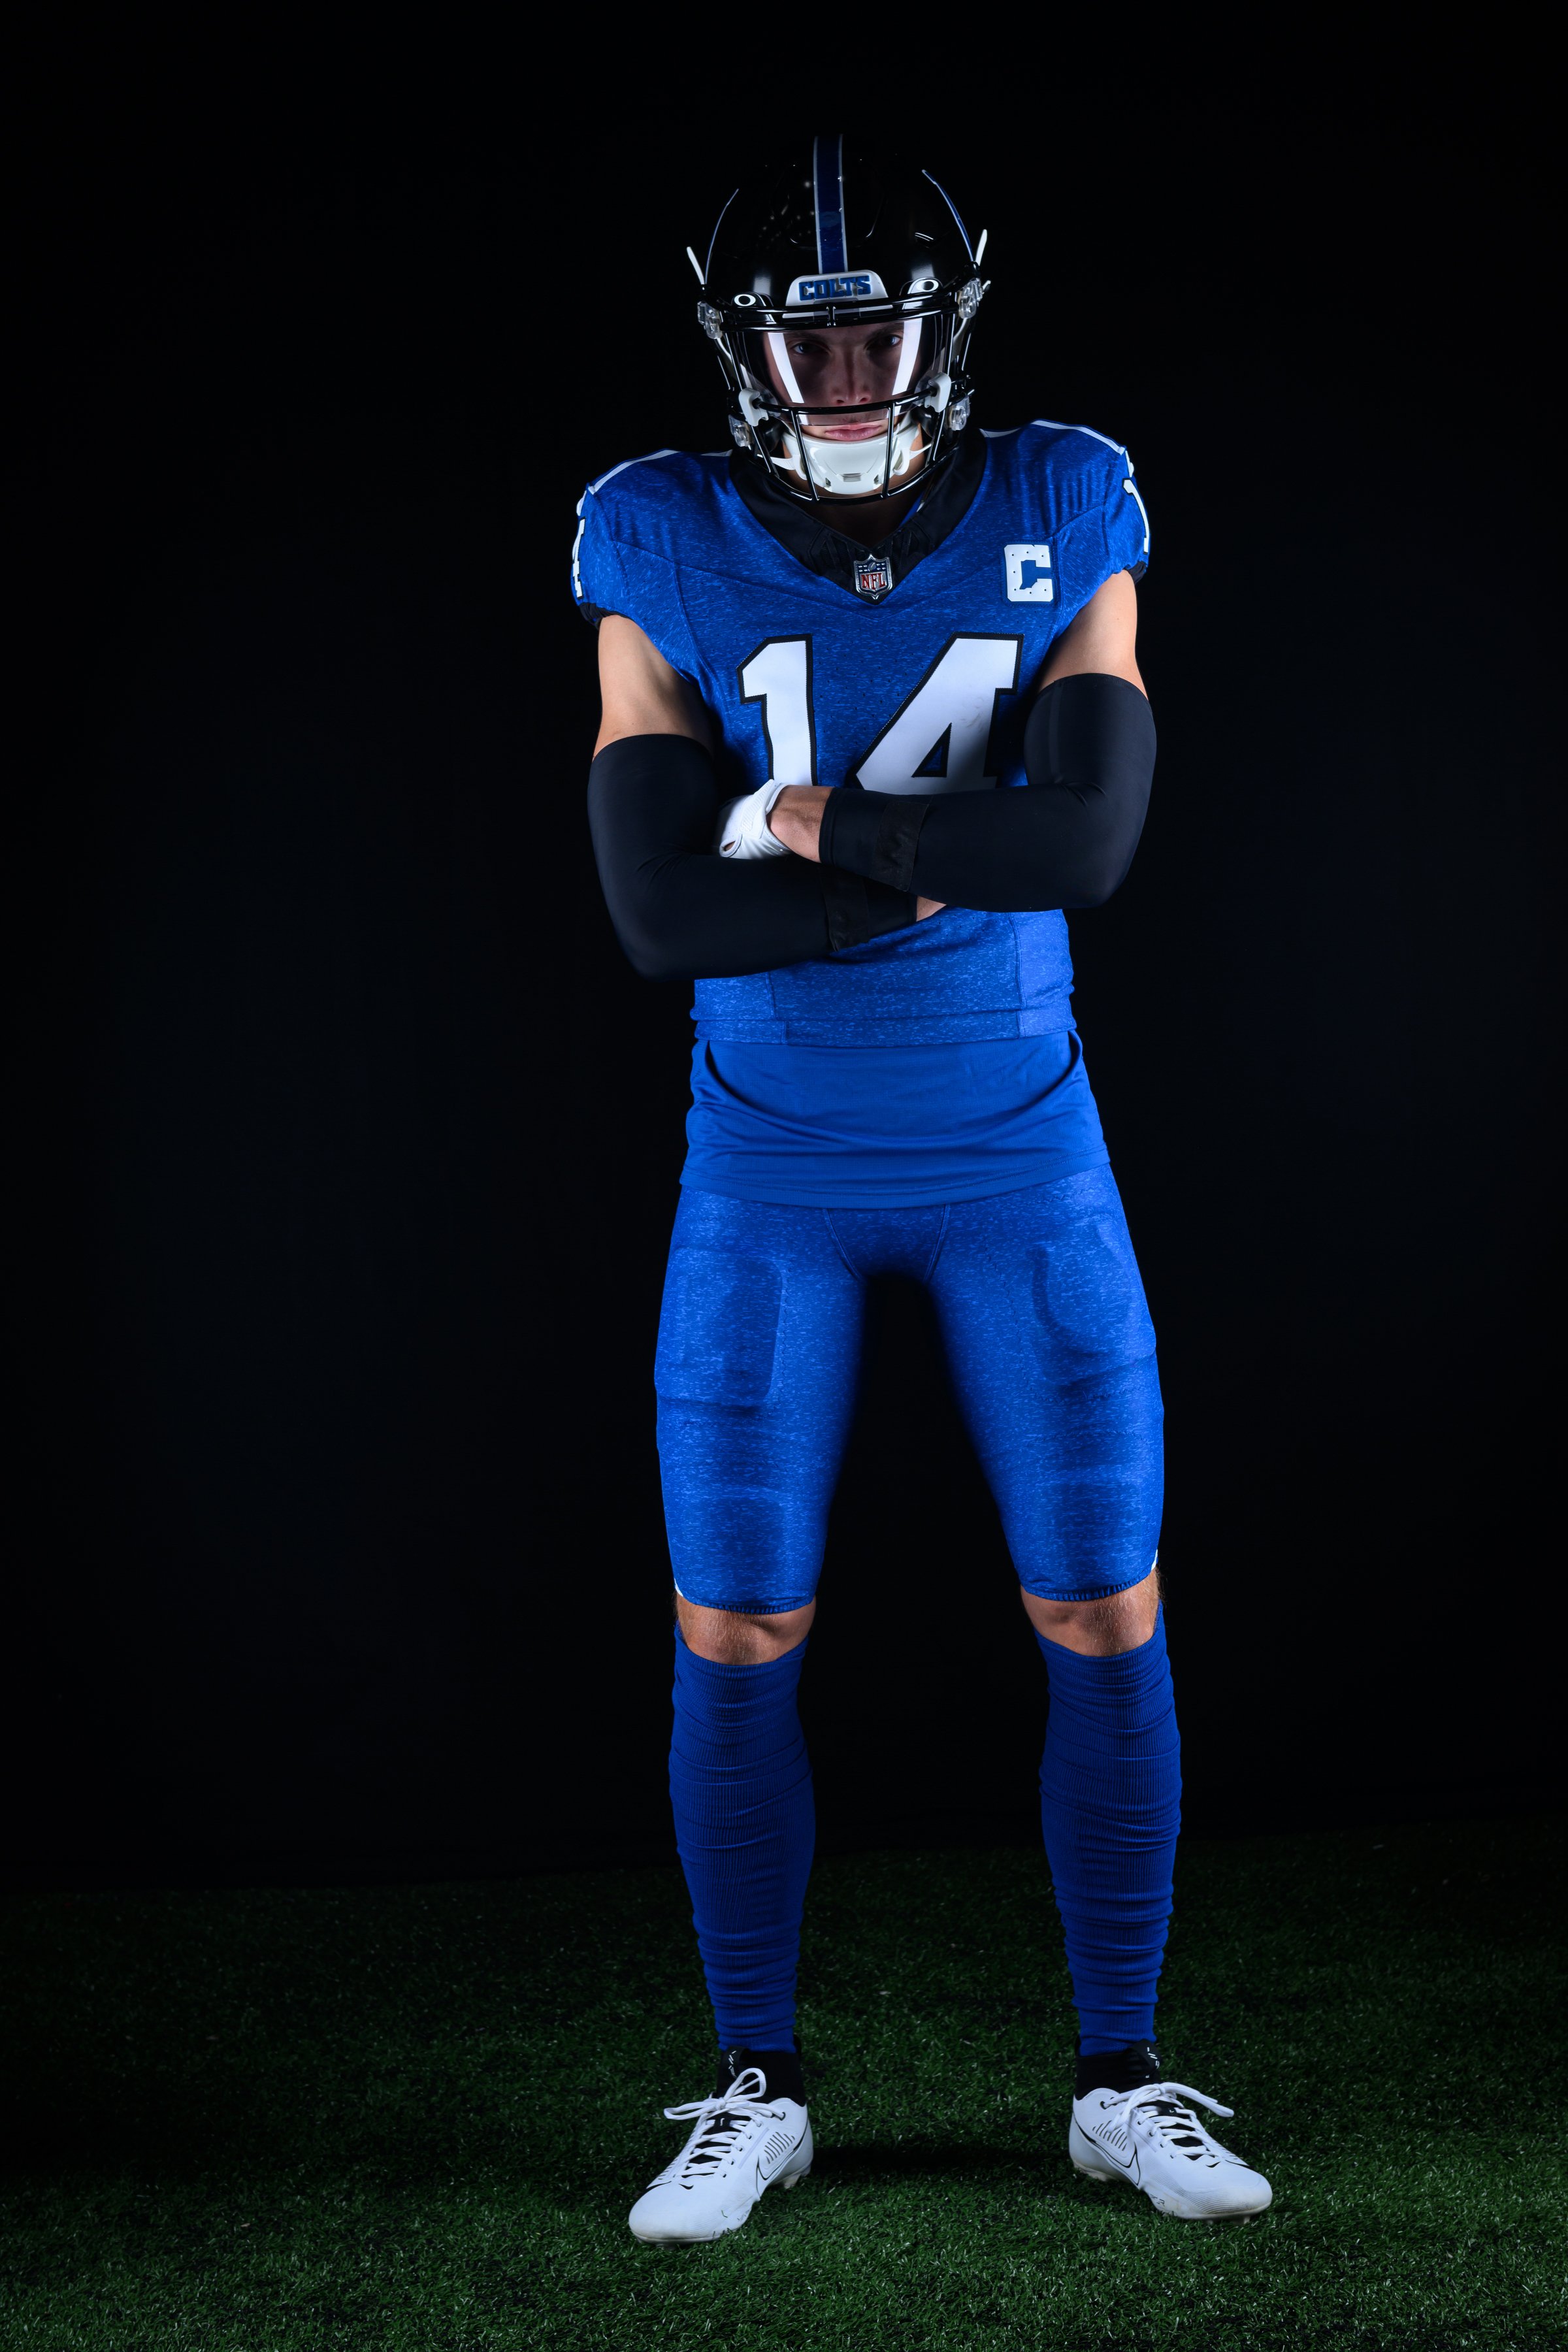 The Indianapolis Colts have unveiled their 'Indiana Nights